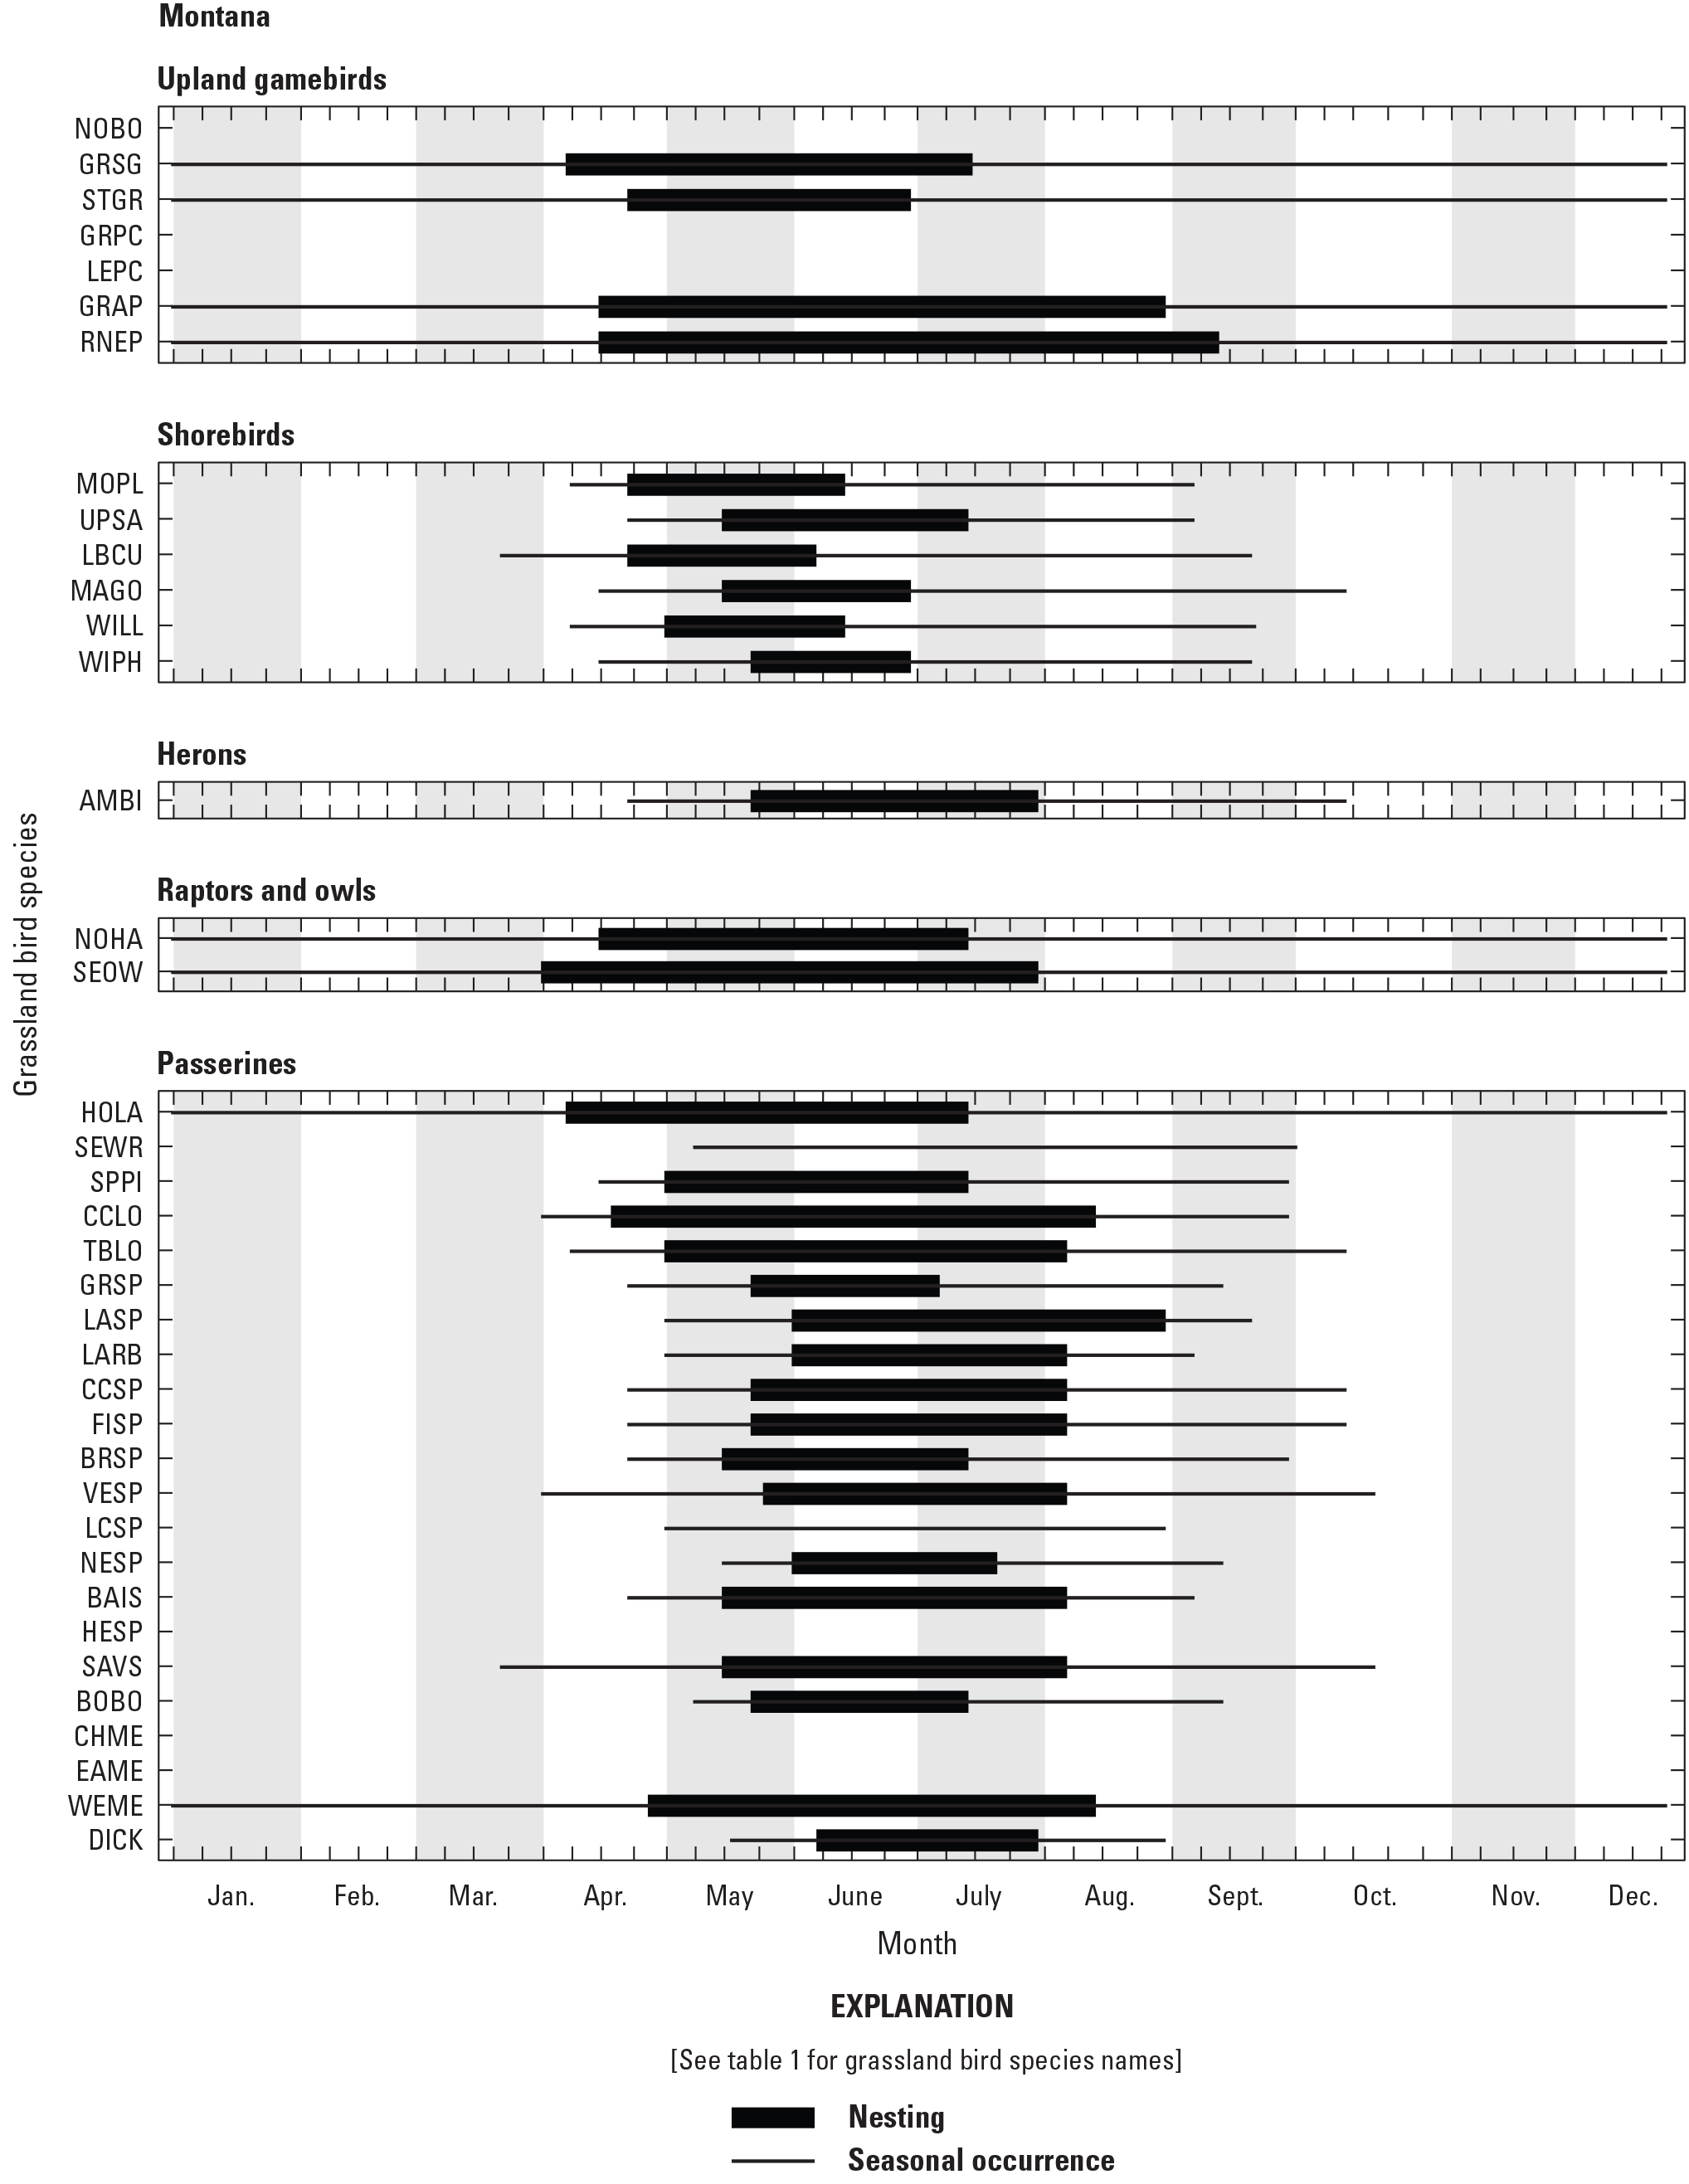 Figure showing seasonal occurrence and nesting phenology for 38 grassland bird species
               in Montana, United States.